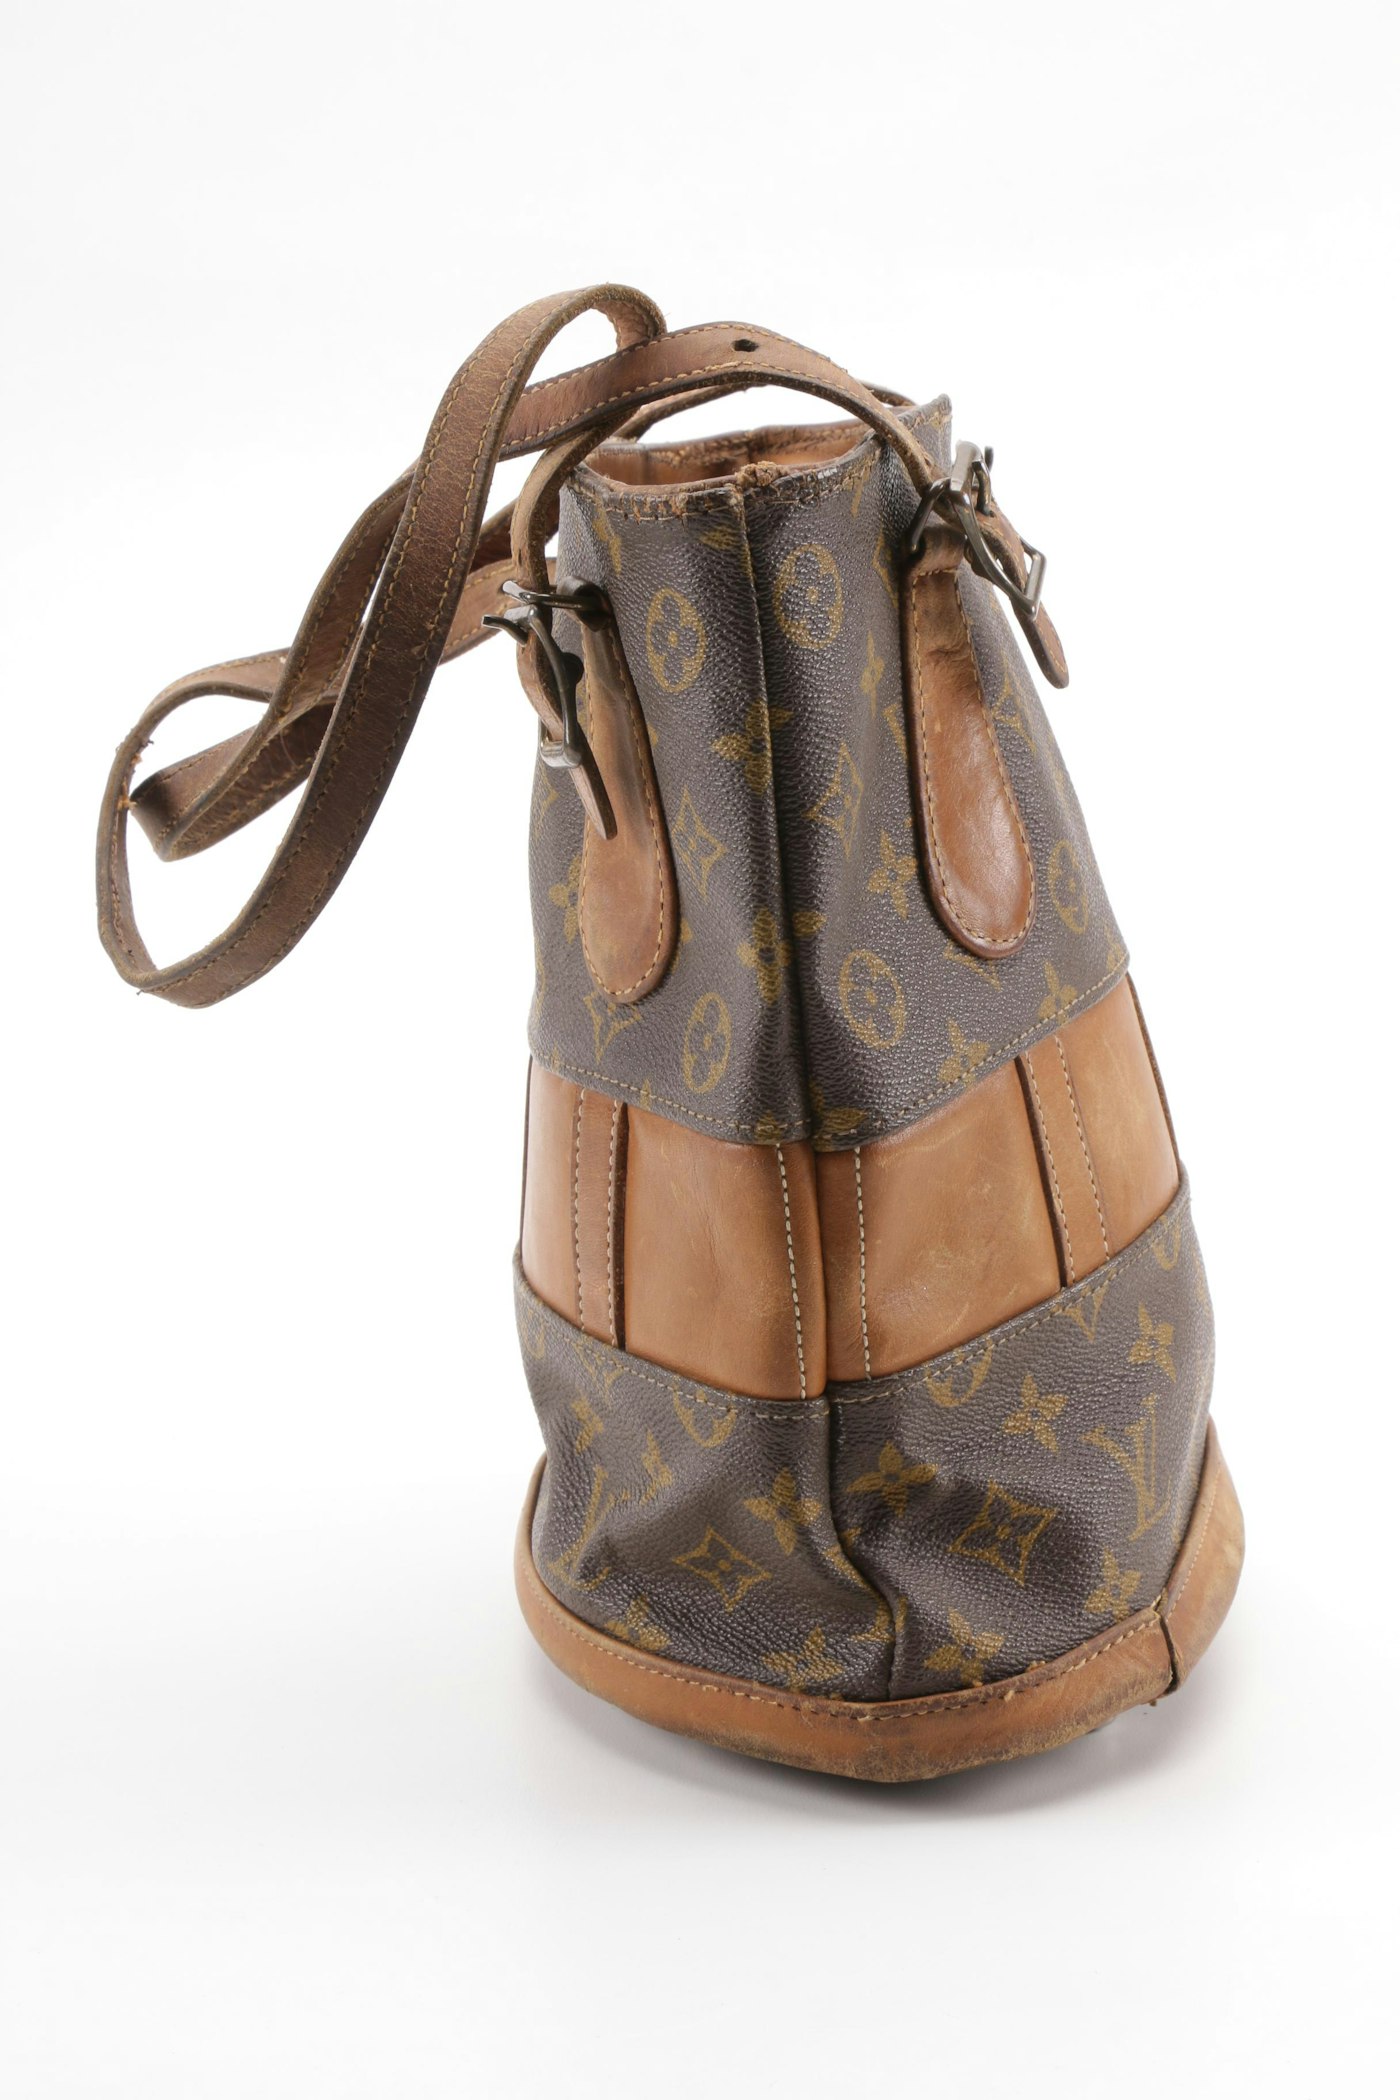 Vintage The French Company for Louis Vuitton Monogram Canvas Bucket PM Bag | EBTH